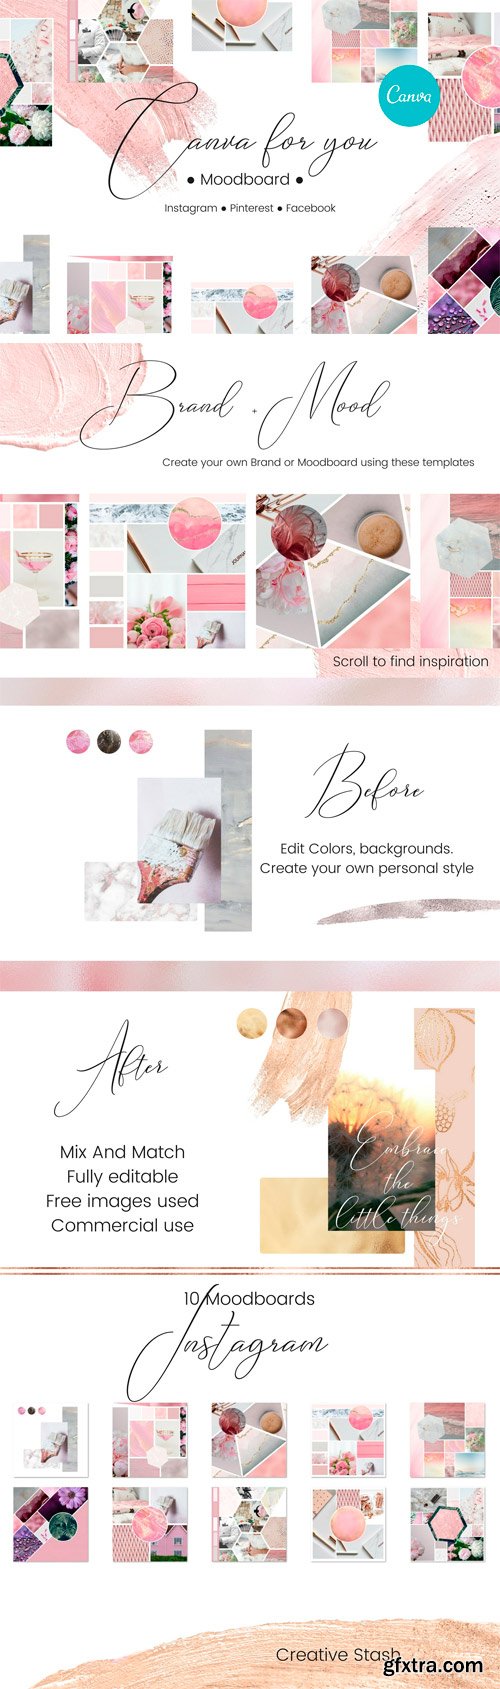 CM - Canva for you - Moodboard 2318245